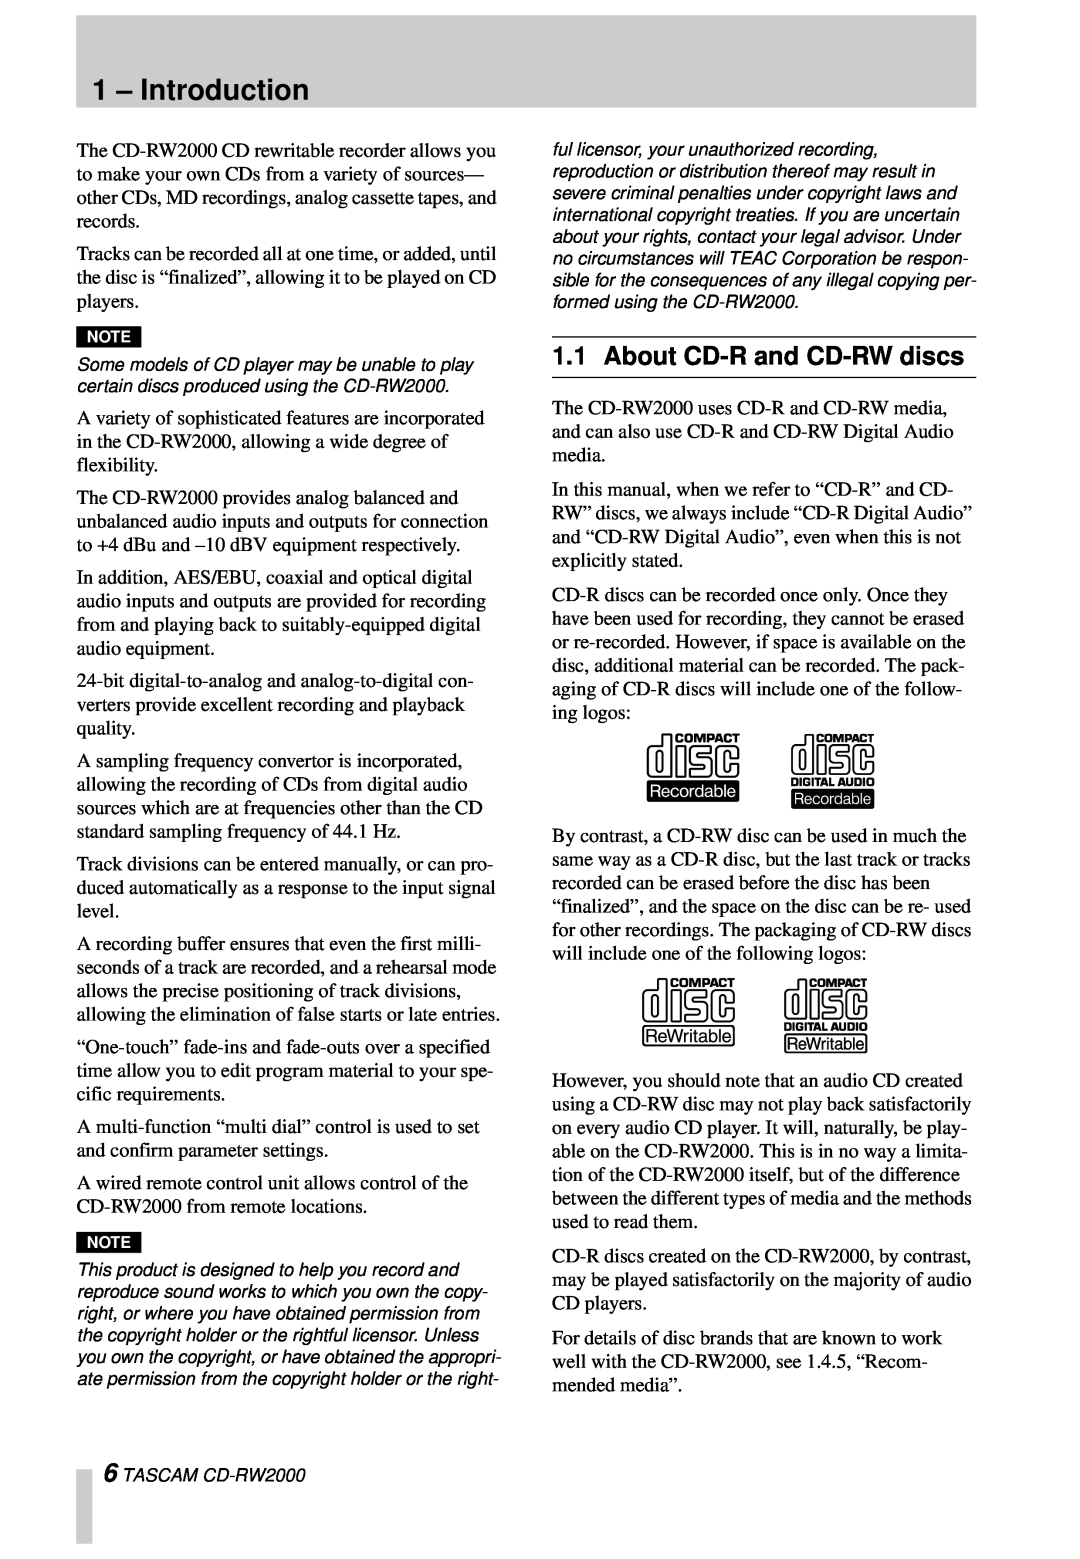 Tascam CD-RW2000 owner manual Introduction, About CD-Rand CD-RWdiscs 